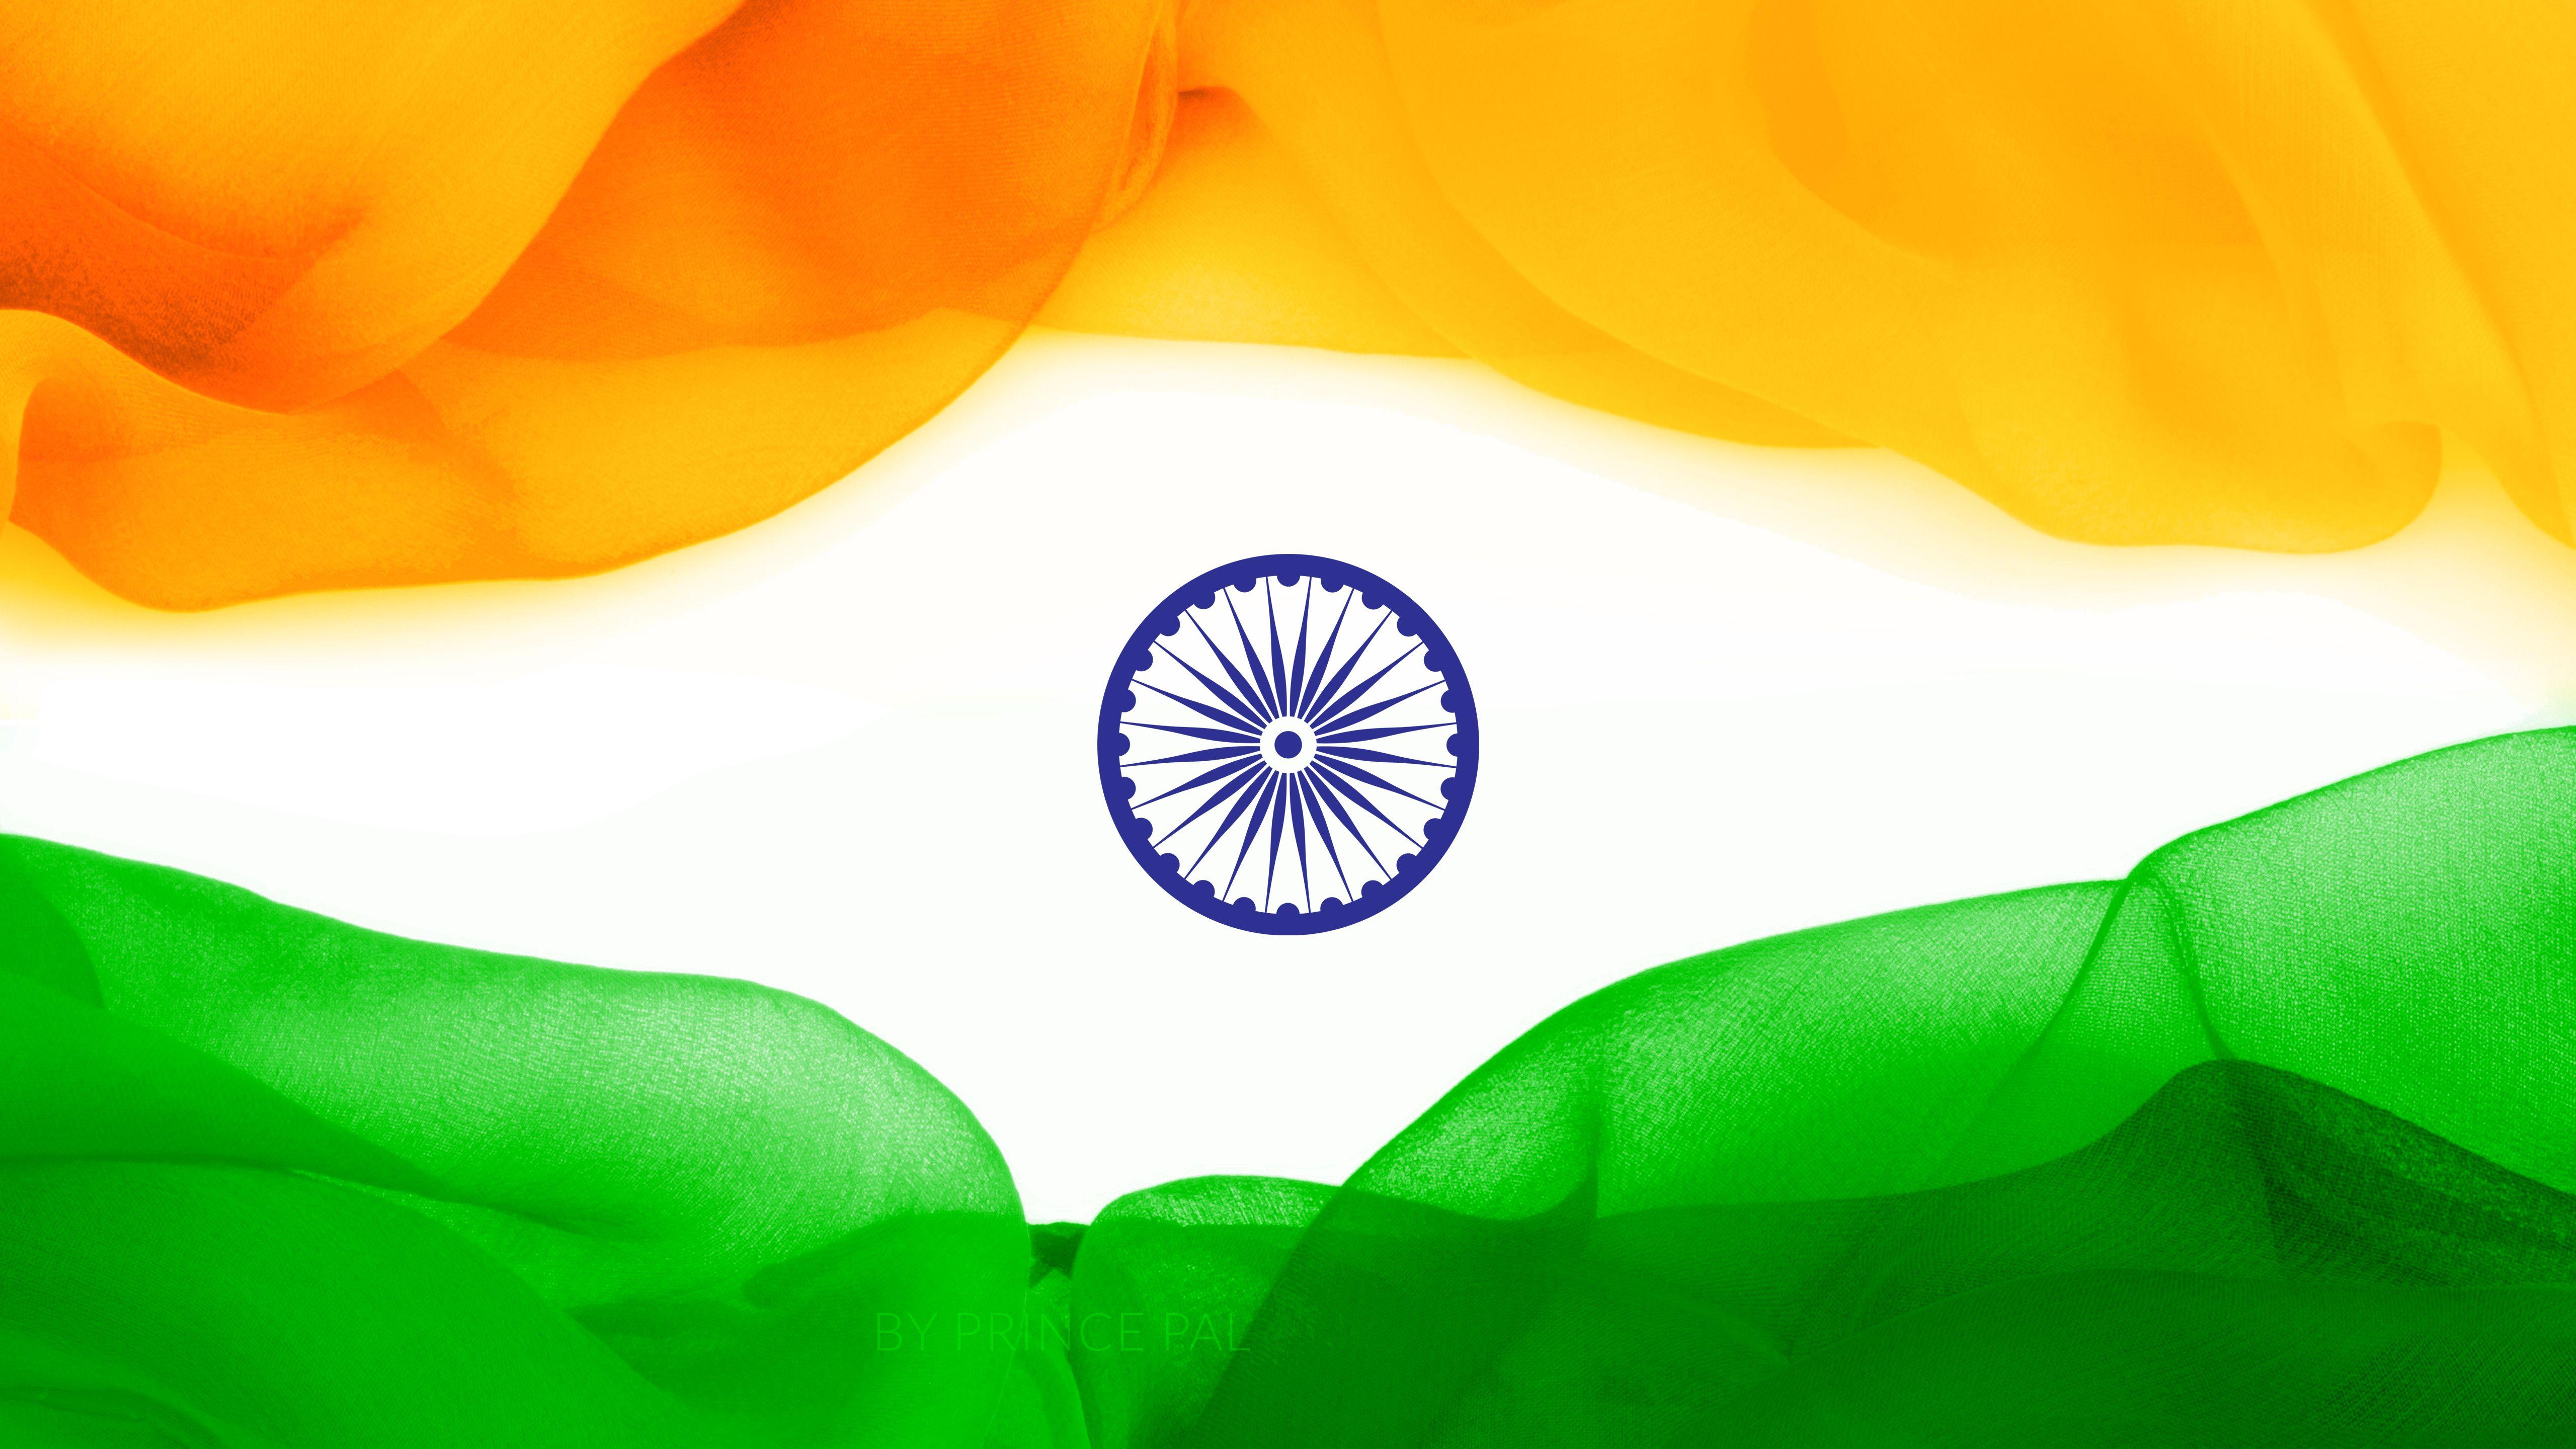 Wallpaper Flag of India, Tricolor, HD, 4K, 5K, World,. Wallpaper for iPhone, Android, Mobile and Desktop